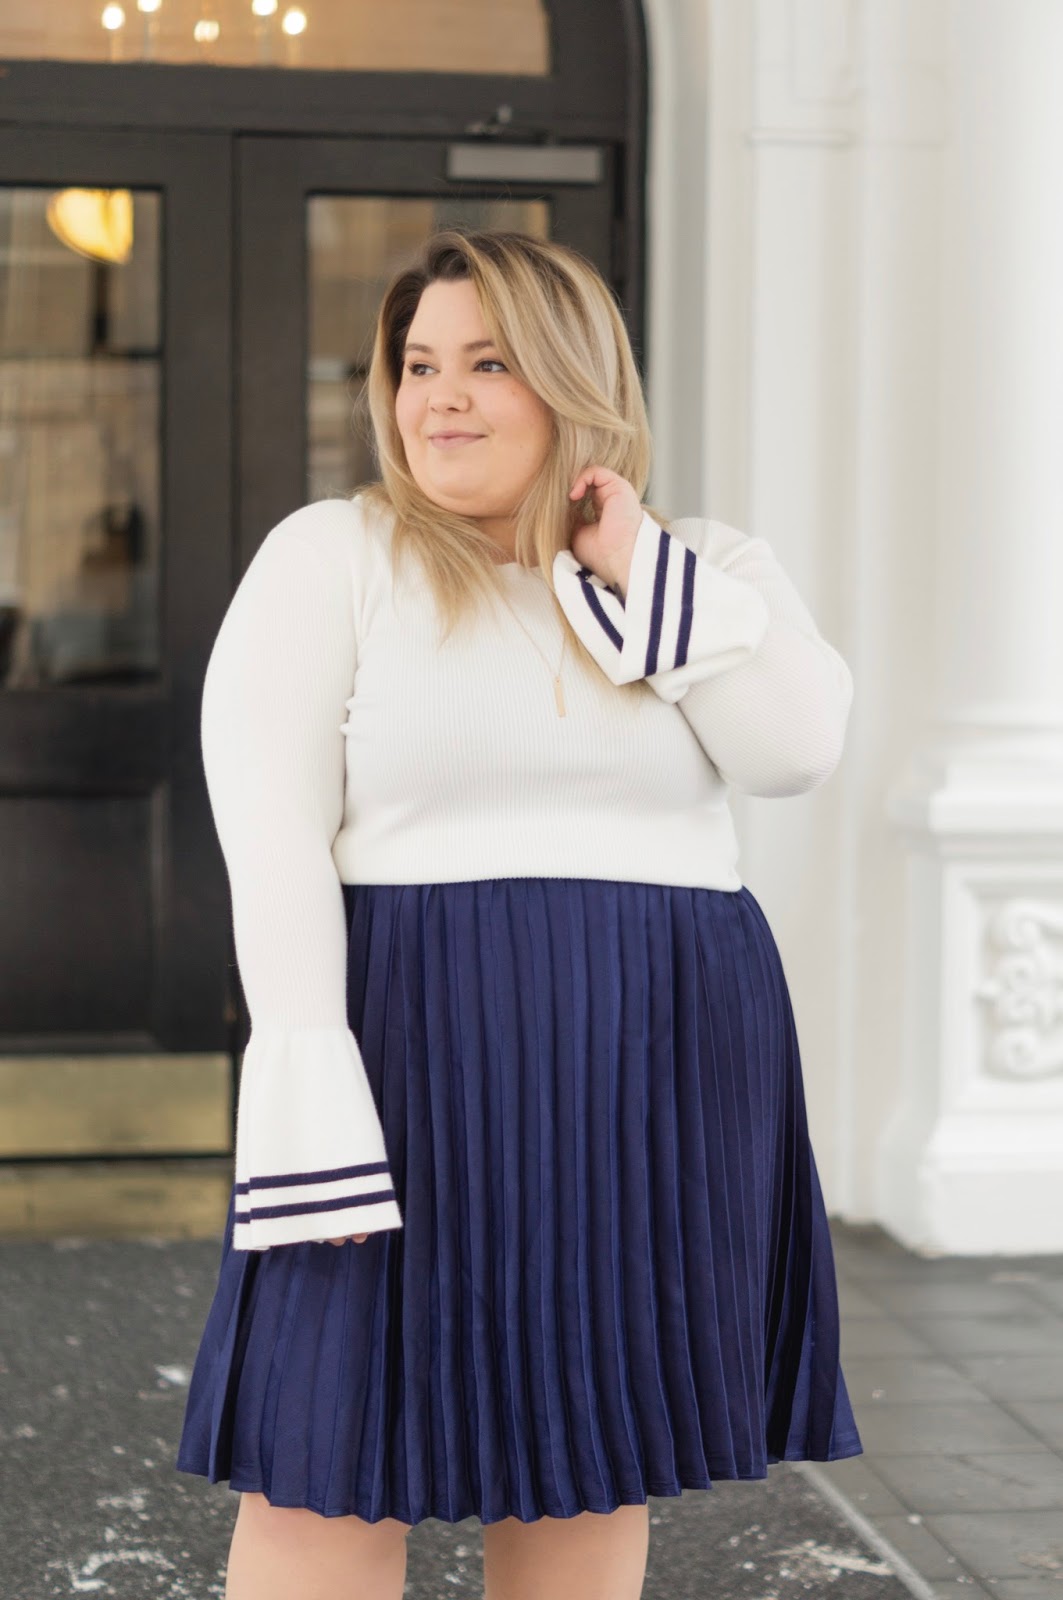 full figured fashion, natalie Craig, natalie in the city, plus size fashion blogger, Chicago plus size fashion blogger, embrace your curves, eff your beauty standards, plus size pleated midi skirt, bell sleeve sweater, affordable plus size clothing, eloquii, eloquii Chicago location